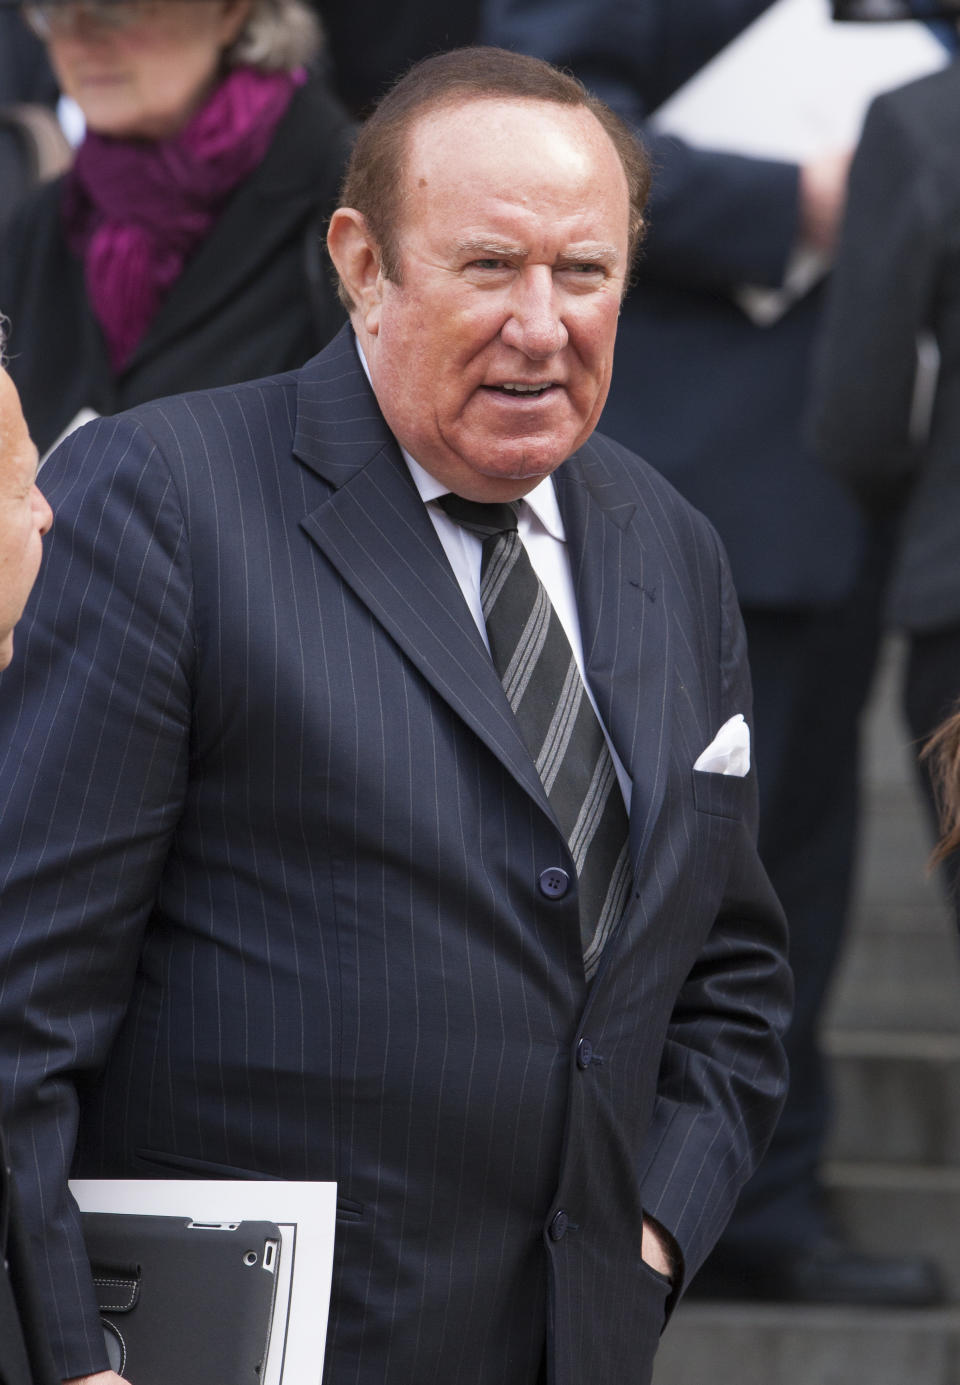 Broadcaster Andrew Neil leaves St Paul's Cathedral, central London, following the funeral service of Baroness Thatcher.   (Photo by Chris Ison/PA Images via Getty Images)